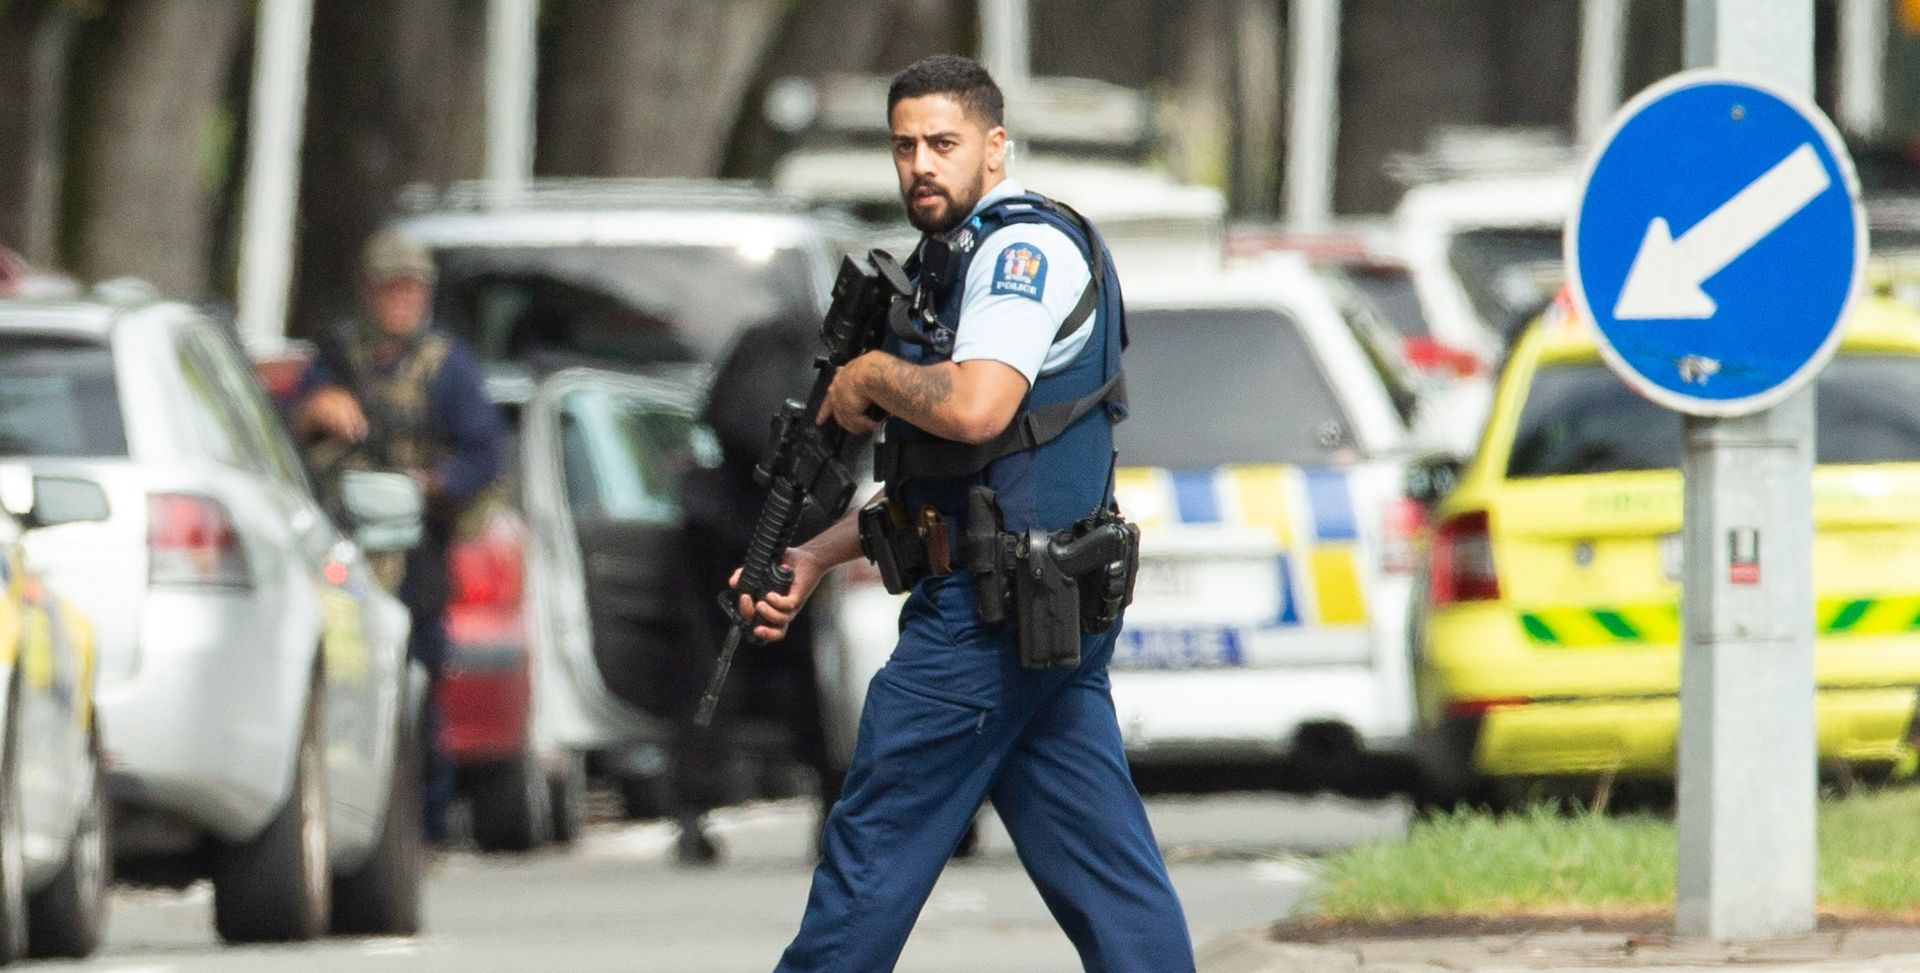 epa07438401 Armed police patrol following a shooting resulting in multiply fatalies and injuries at the Masjid Al Noor on Deans Avenue in Christchurch, New Zealand, 15 March 2019. According to media reports on 15 March 2019, at least one gunman opened fire at around 1:40 pm local time after walking into the Masjid Al Noor Mosque, killing and wounding several of people. Armed police officers were deployed to the scene, along with emergency service personnel. There are also confirmed reports of a shooting at a second mosque in Christchurch, and both incidents have left at least 40 people dead and more than 20 people seriously wounded. Four people are in custody in connection with the shootings.  EPA/Martin Hunter NEW ZEALAND OUT